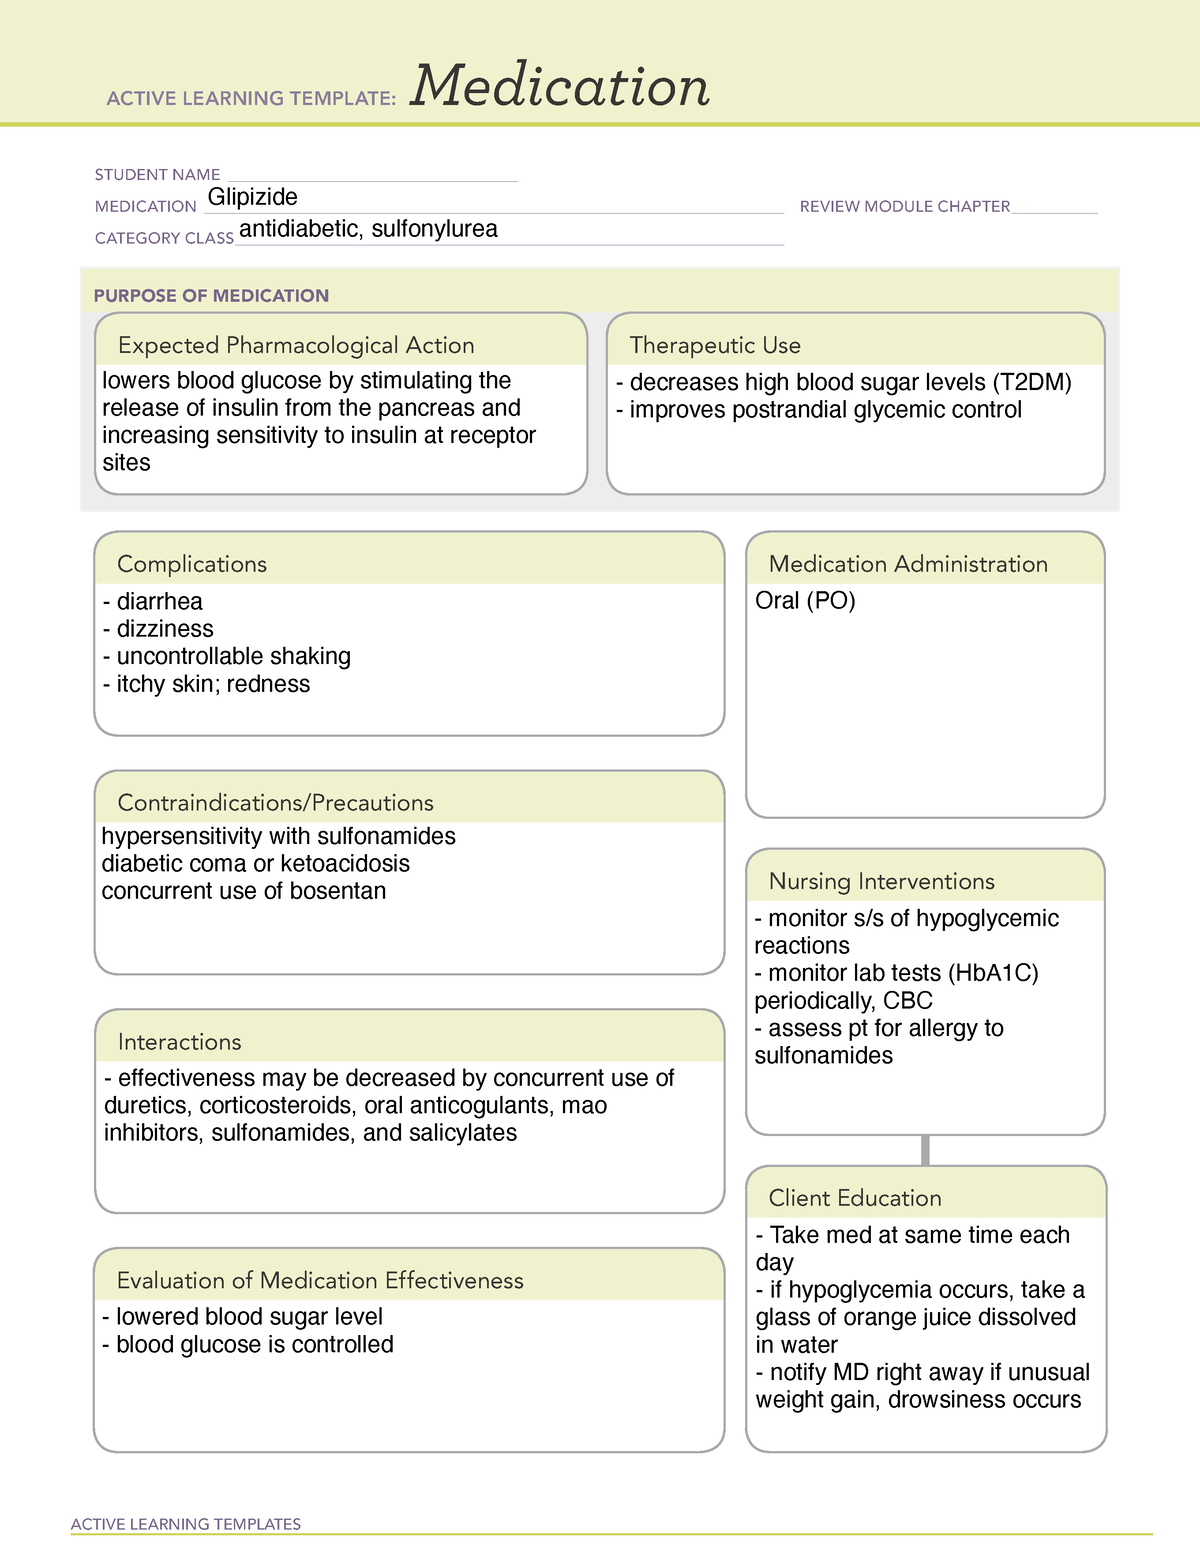 glipizide-ati-med-template-active-learning-templates-medication